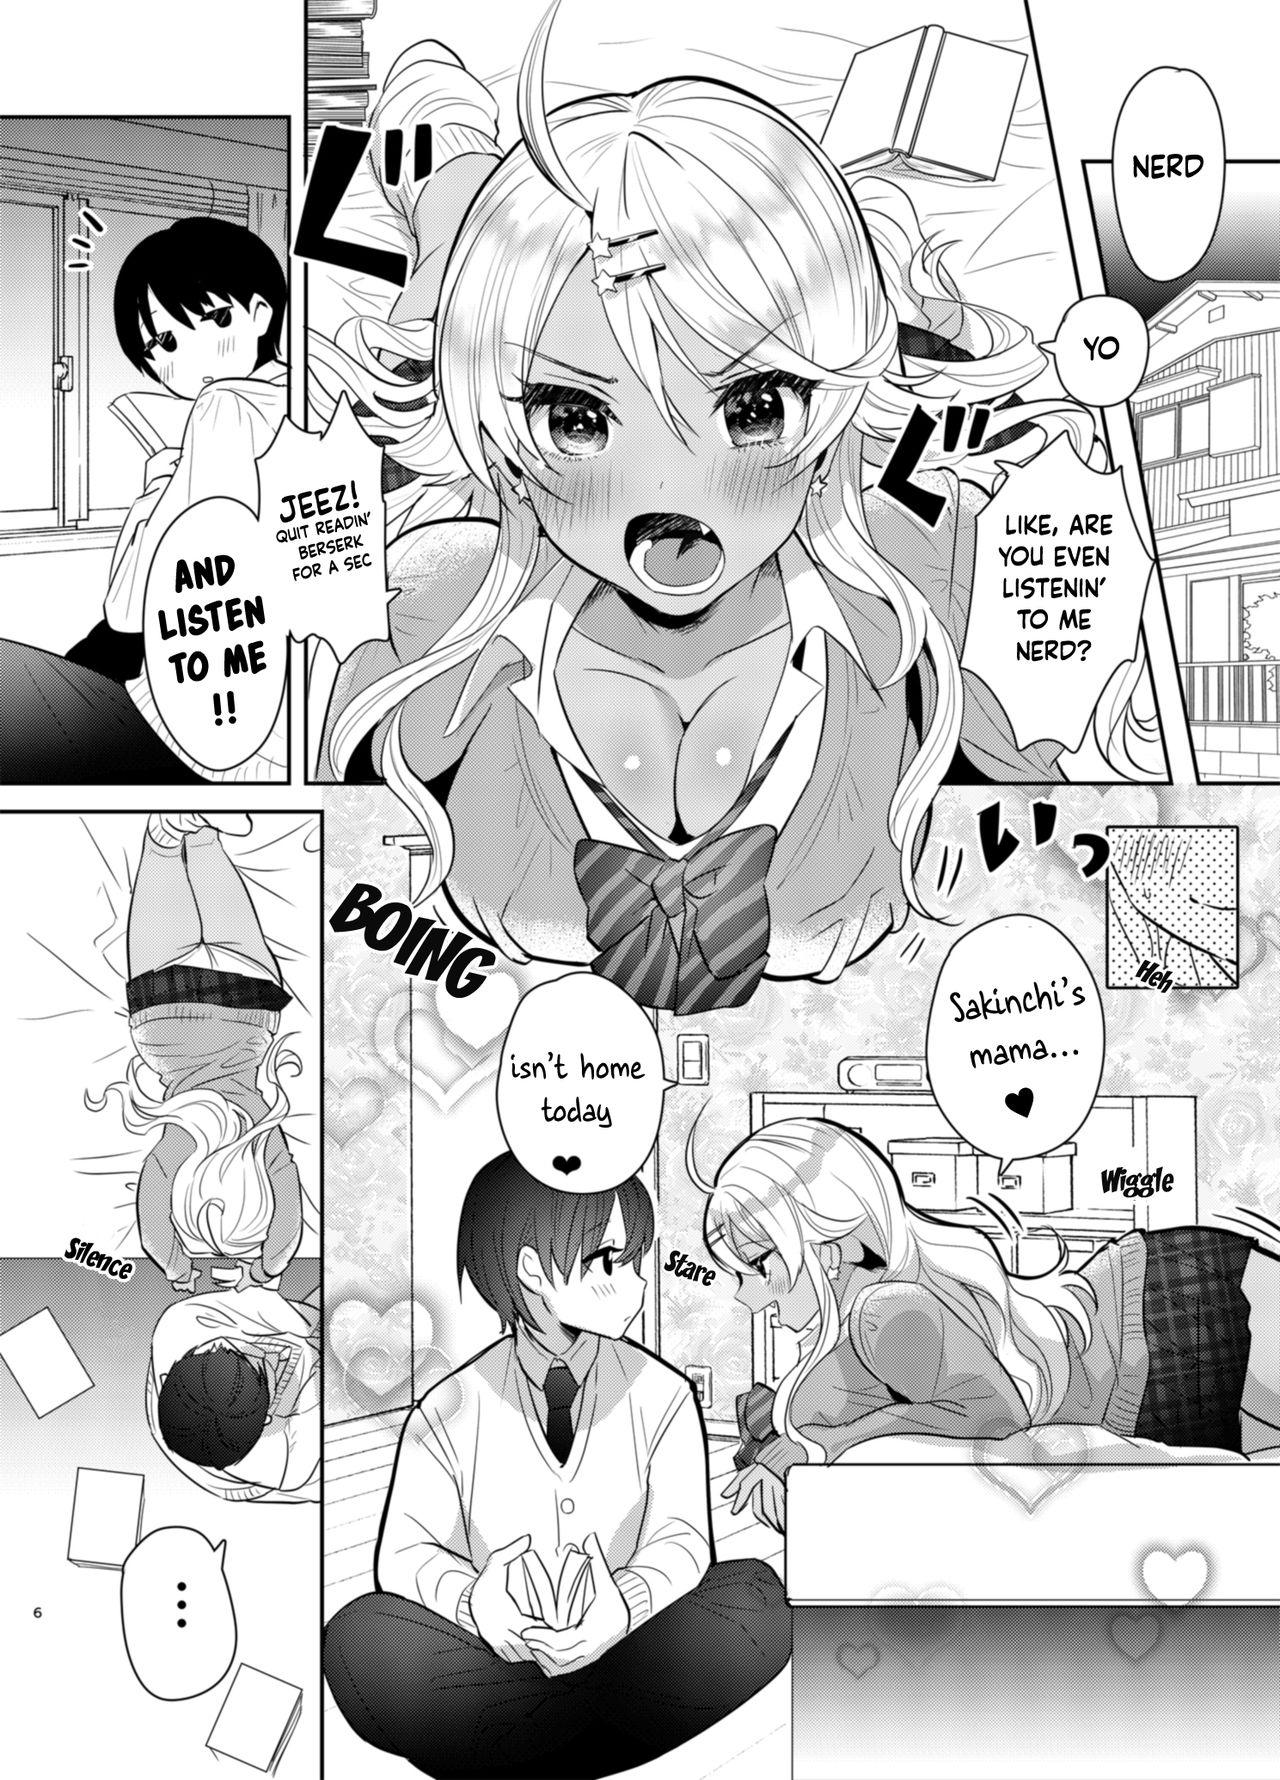 Young Old Sakinchi, Kyou Mama Inain da Onlyfans - Page 6